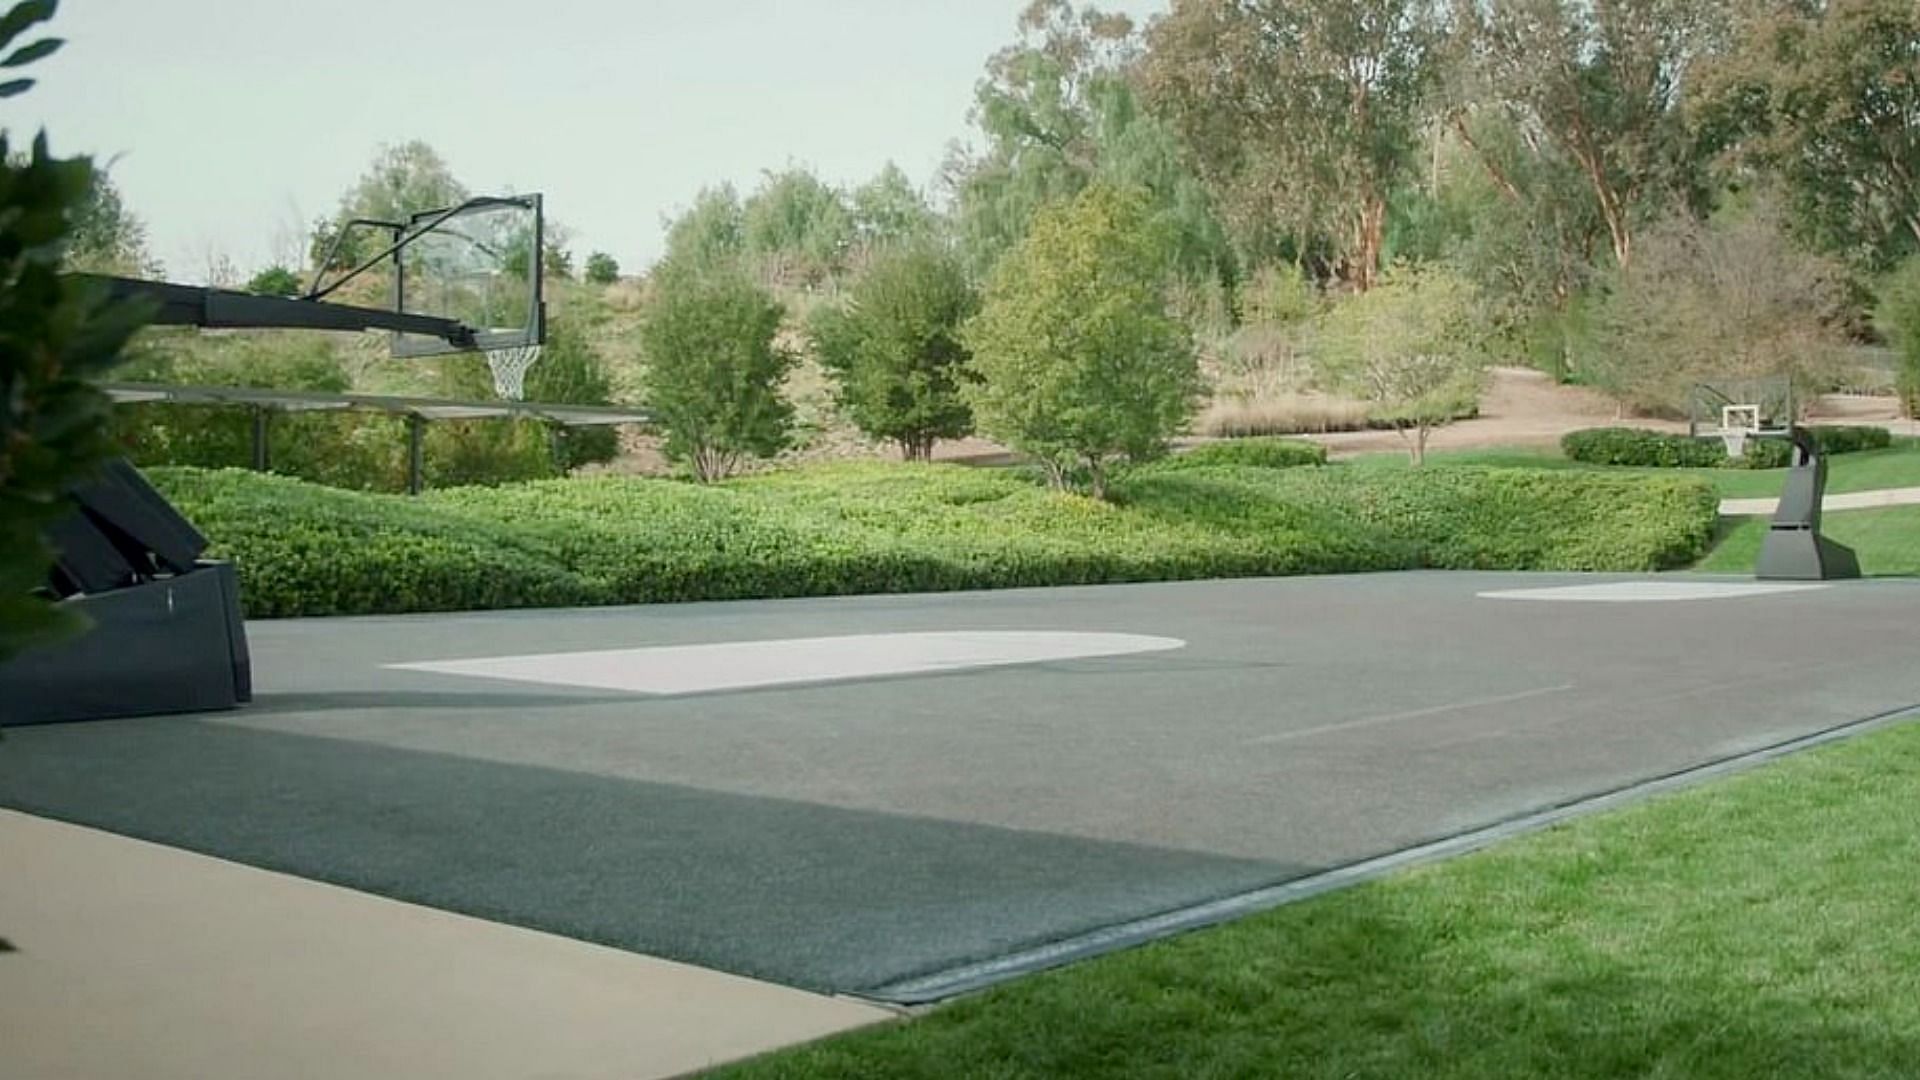 The basketball court where the children hang out, play and run around (Image via Vogue/YouTube)